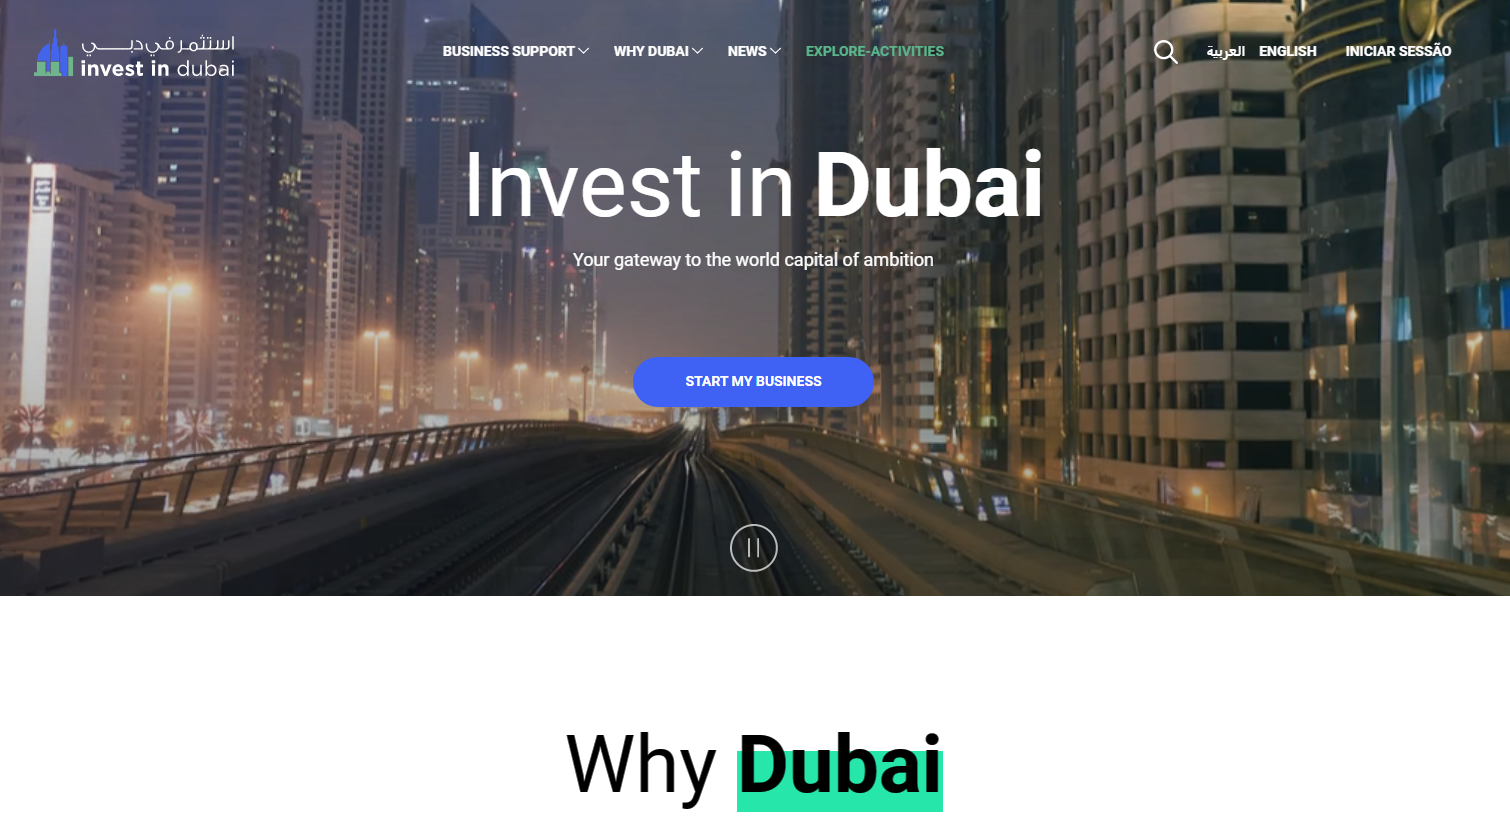 A screenshot of a company talking about startup investments in Dubai.